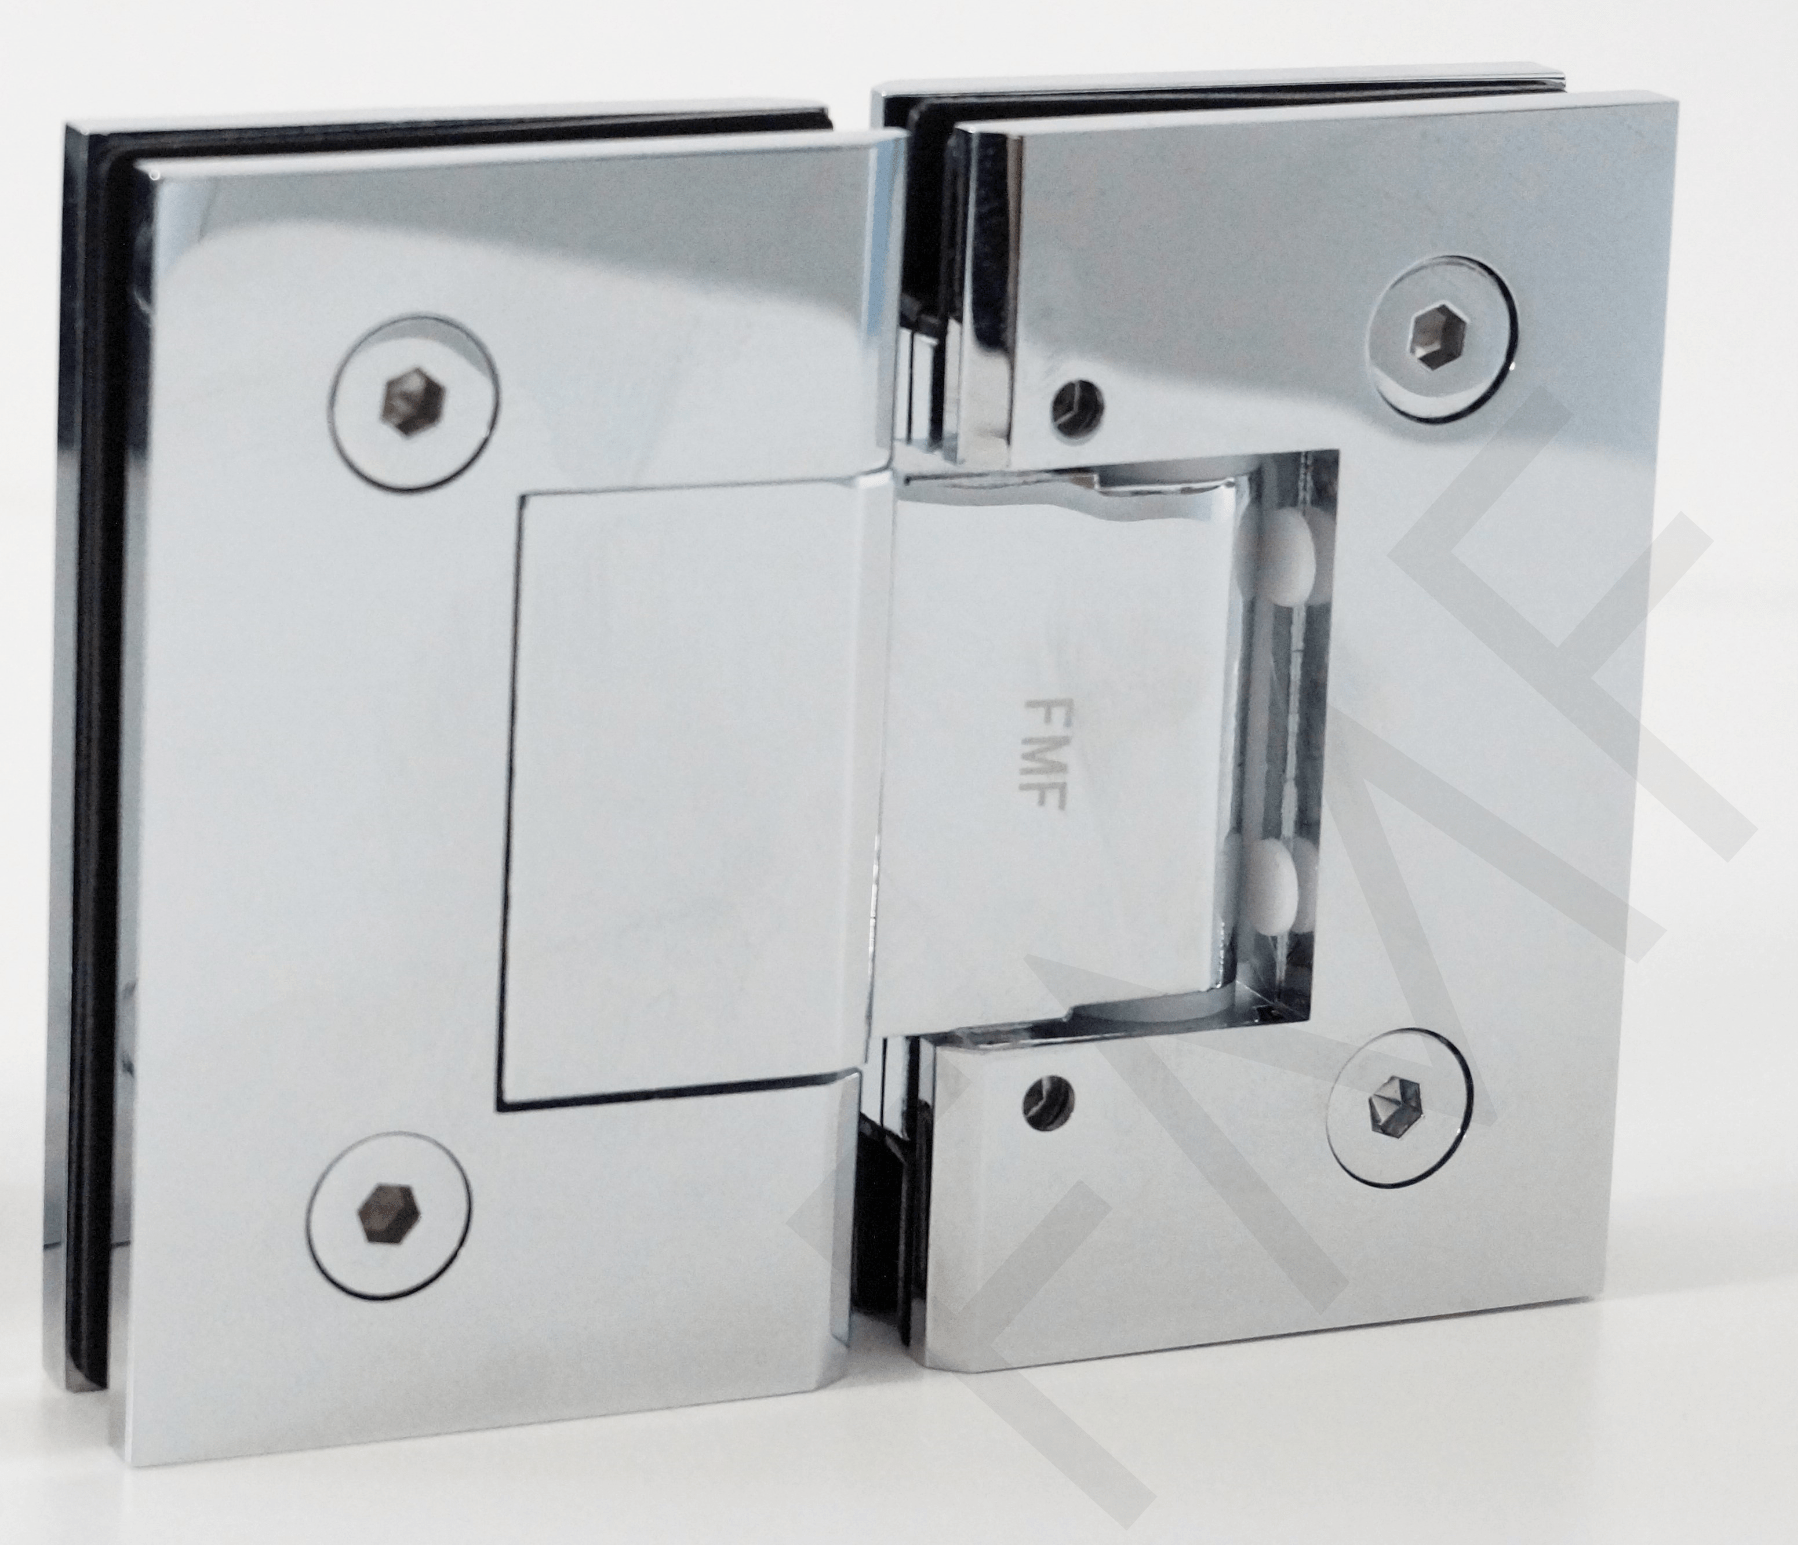 Choose FMF 180° Adjustable Glass-To-Glass Hinges for enabling off-angle or desired angles installations. Made of Solid Brass, the hinges are resistant to water and rust. They are also well-known for their durability and strength. These hinges give an exceptionally all-visible look to your glass shower doors. They are used to join two adjacent glass panels for accomplishing an all-glass shower door installation project. Ideal for shower door installations on residential and commercial properties such as hotels, these hinges are the highest pick of constructors and architects.